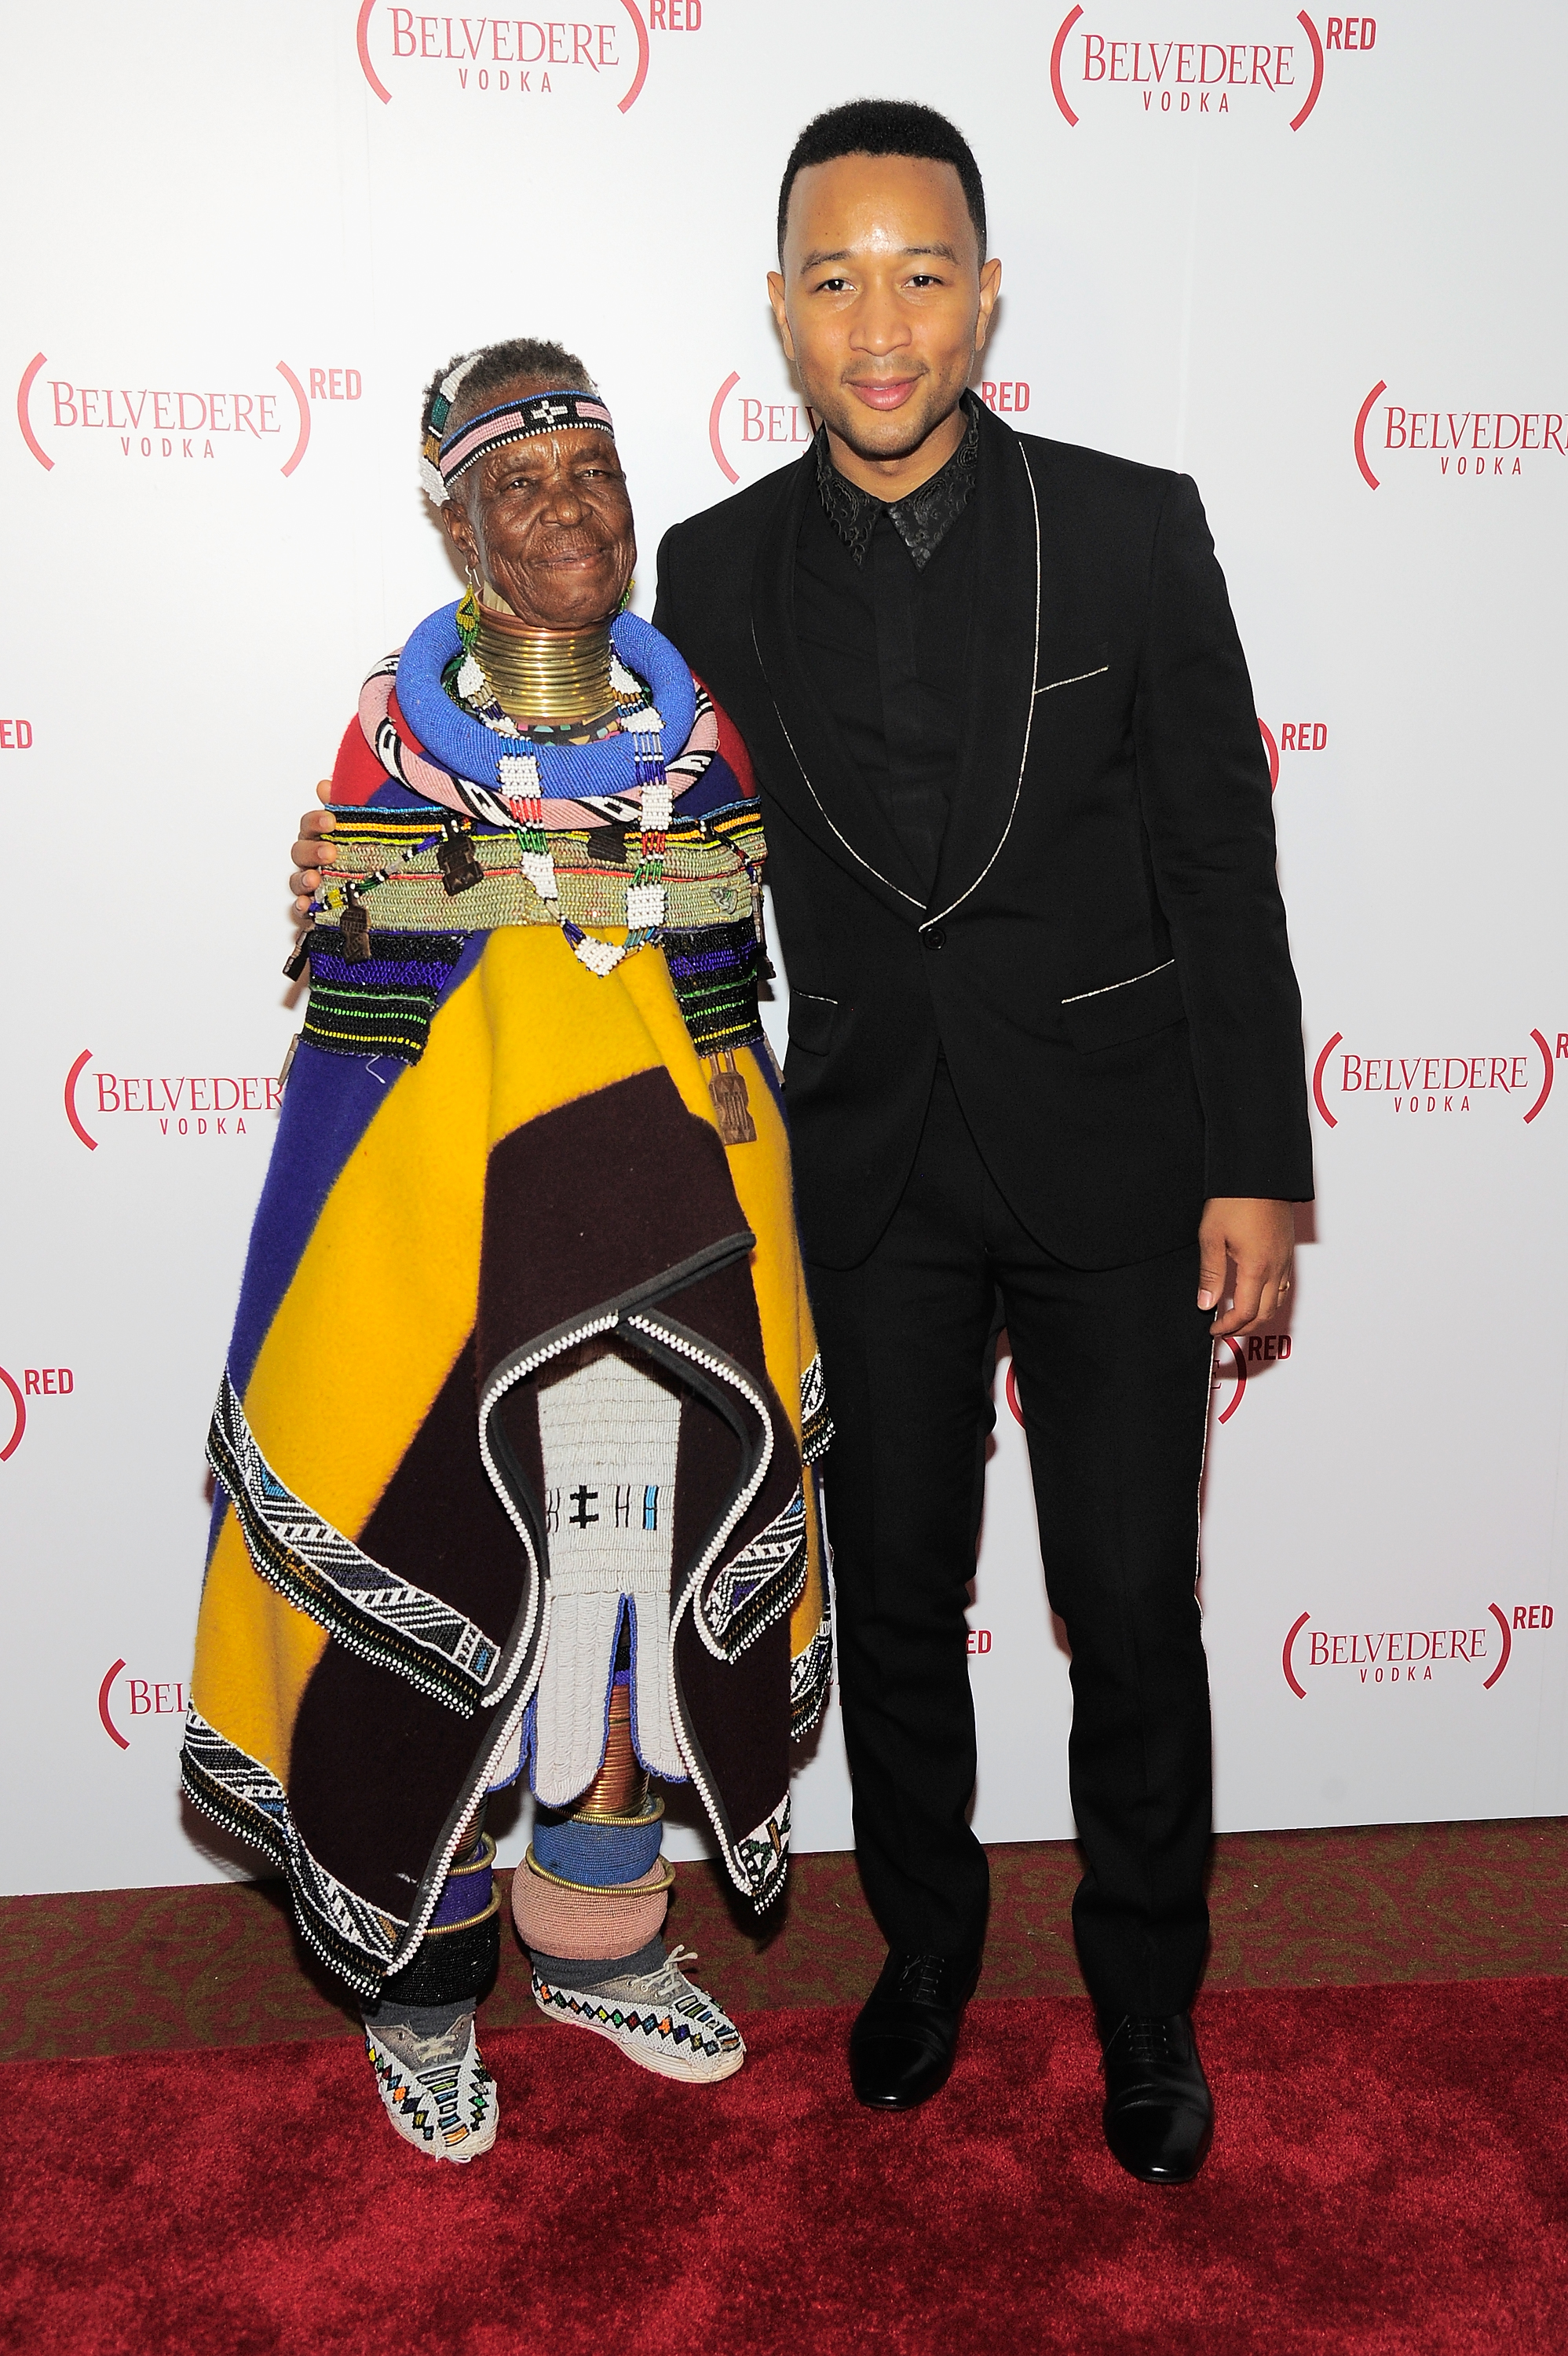 NEW YORK, NY - AUGUST 27: Artist Esther Mahlangu and recording artist John Legend attend the Belvedere Presents One Night for Life with John Legend at the Apollo Theater at The Apollo Theater on August 27, 2016 in New York City.  (Photo by Owen Hoffmann/Patrick McMullan via Getty Images)